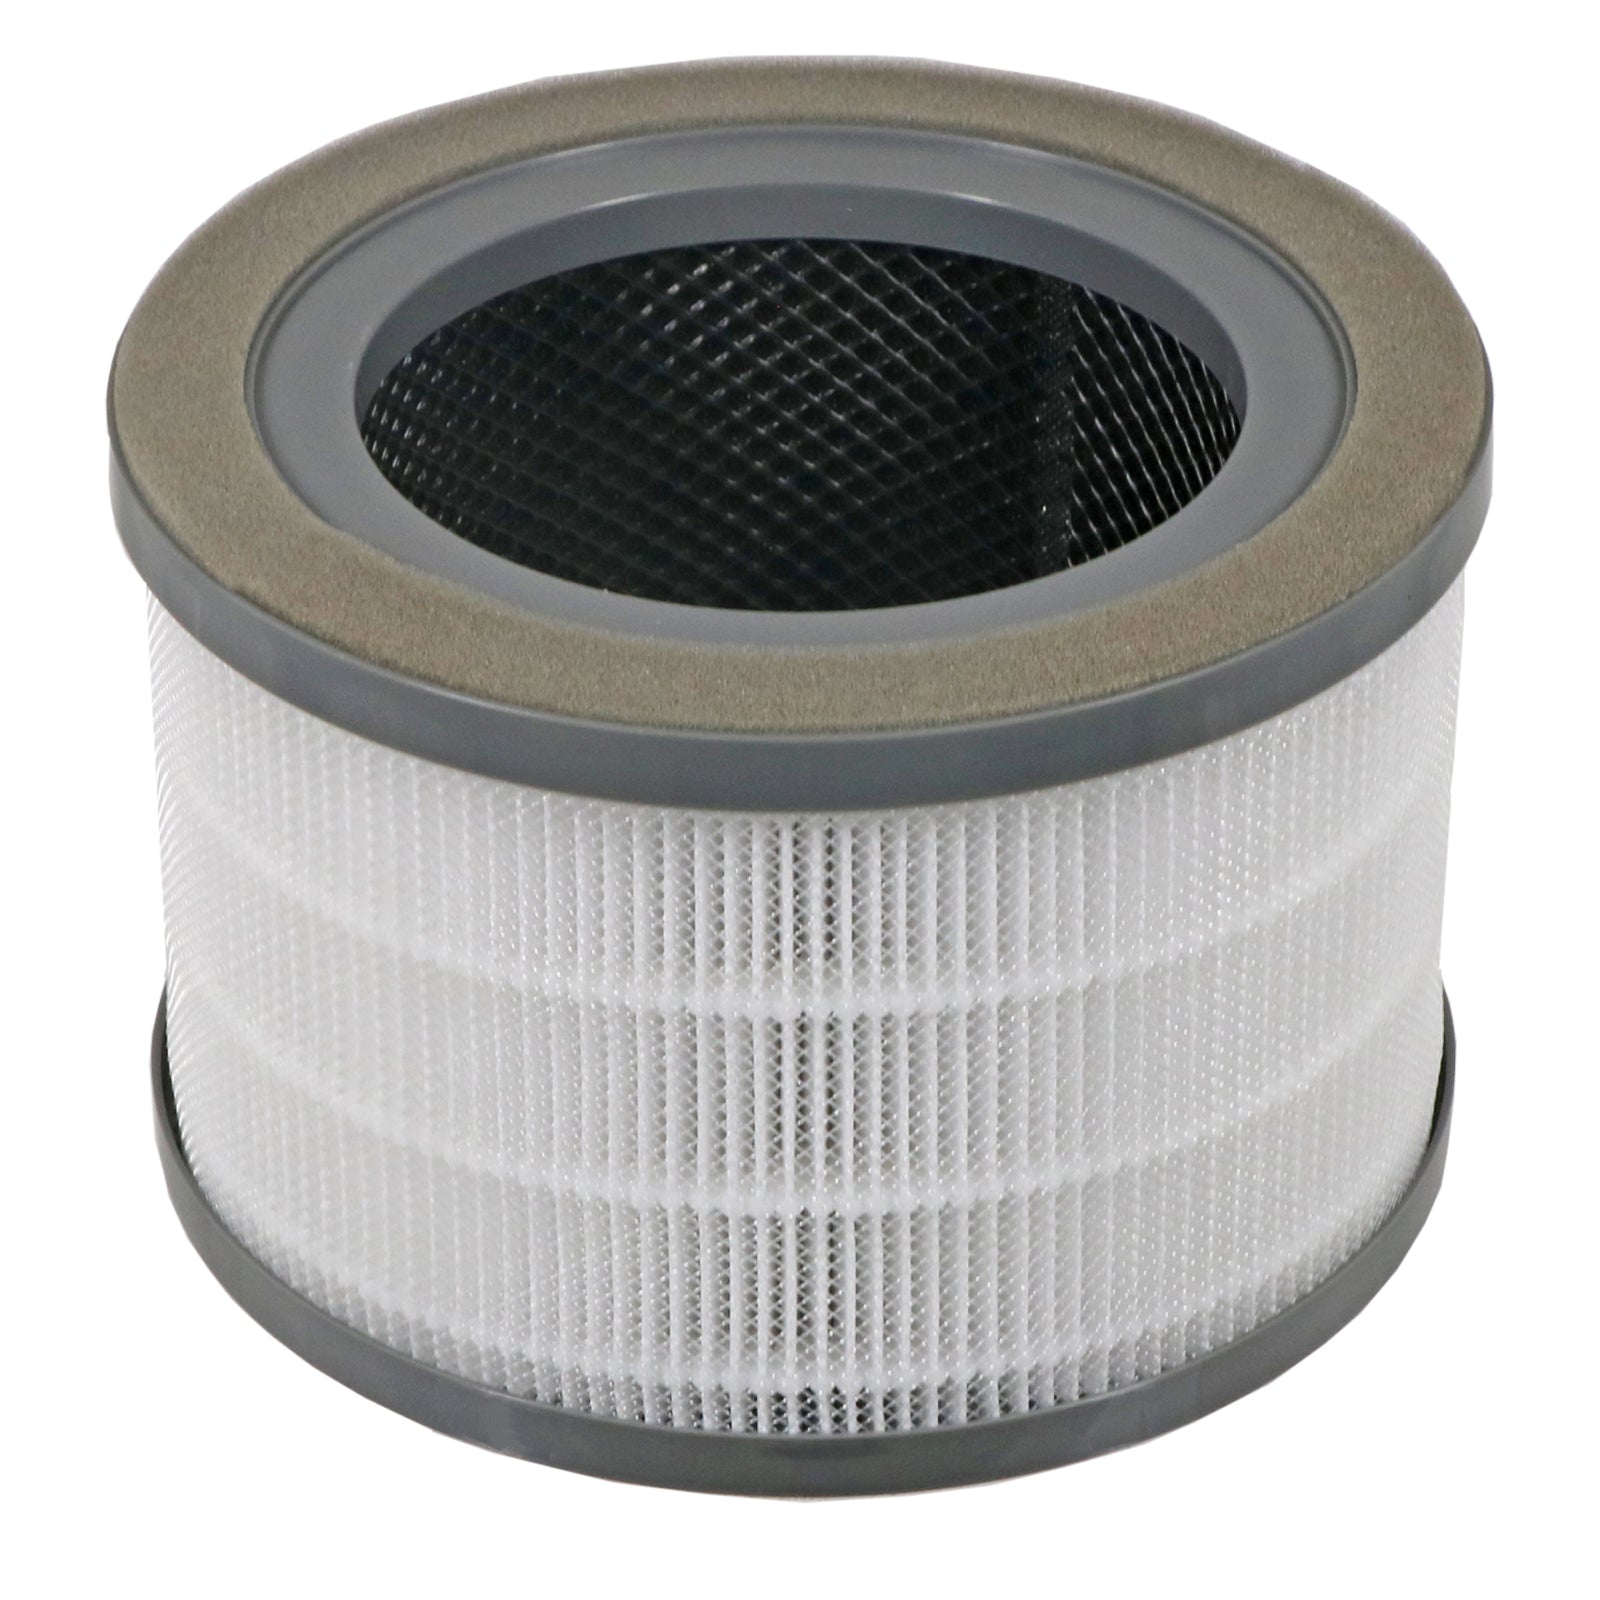 Filter for LEVOIT Vista 200 Air Purifier Type 200-RF HEPA 3-IN-1 Filtration x 2